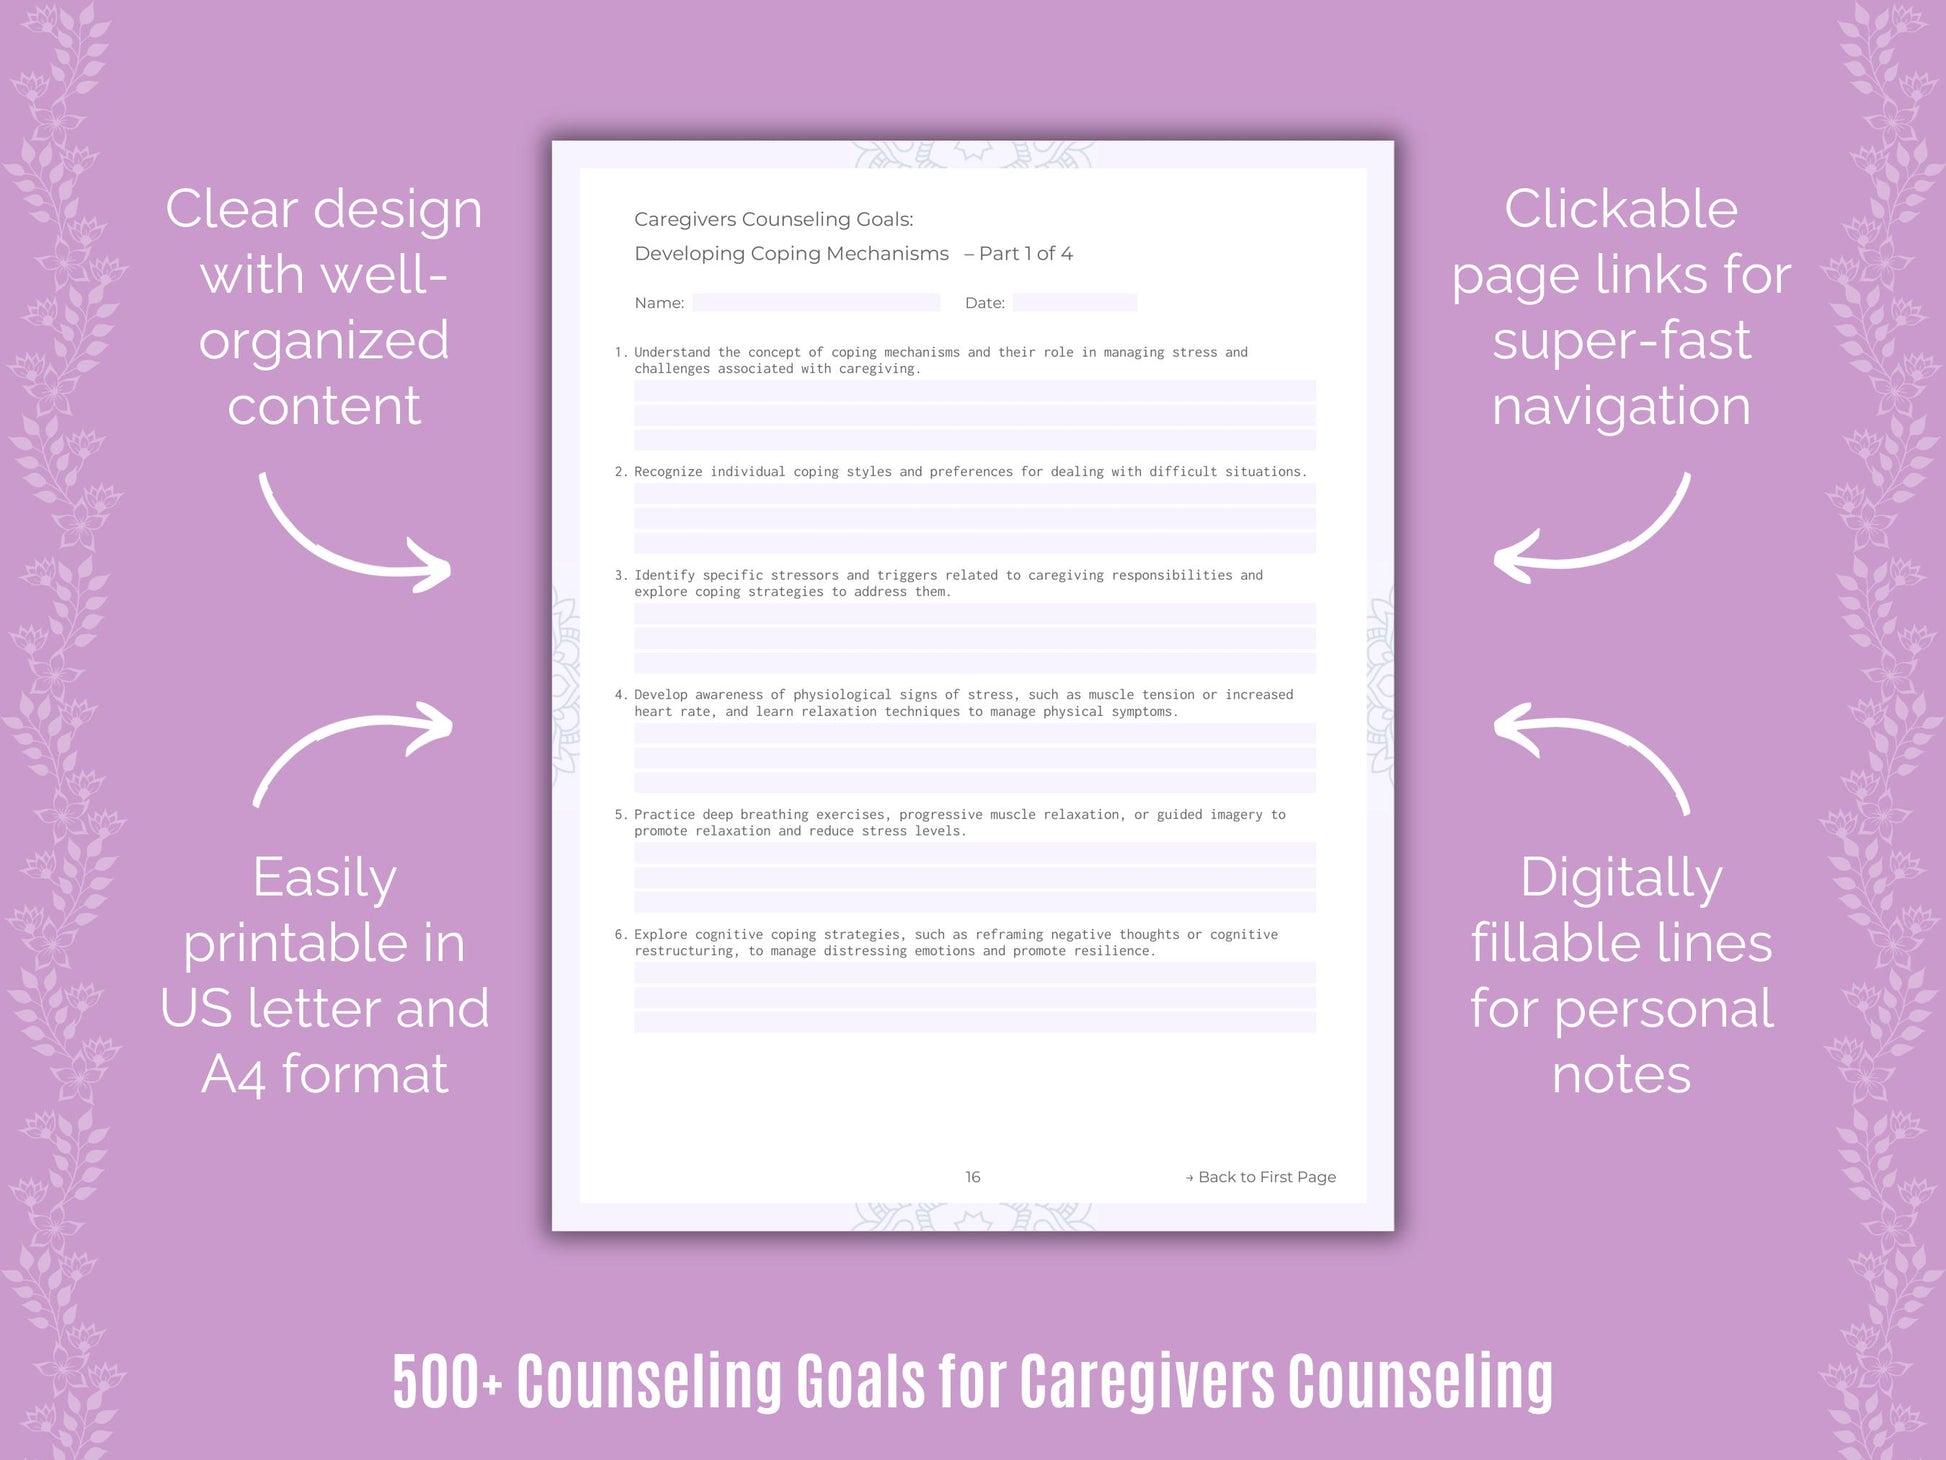 Caregivers Counseling Goals Resource